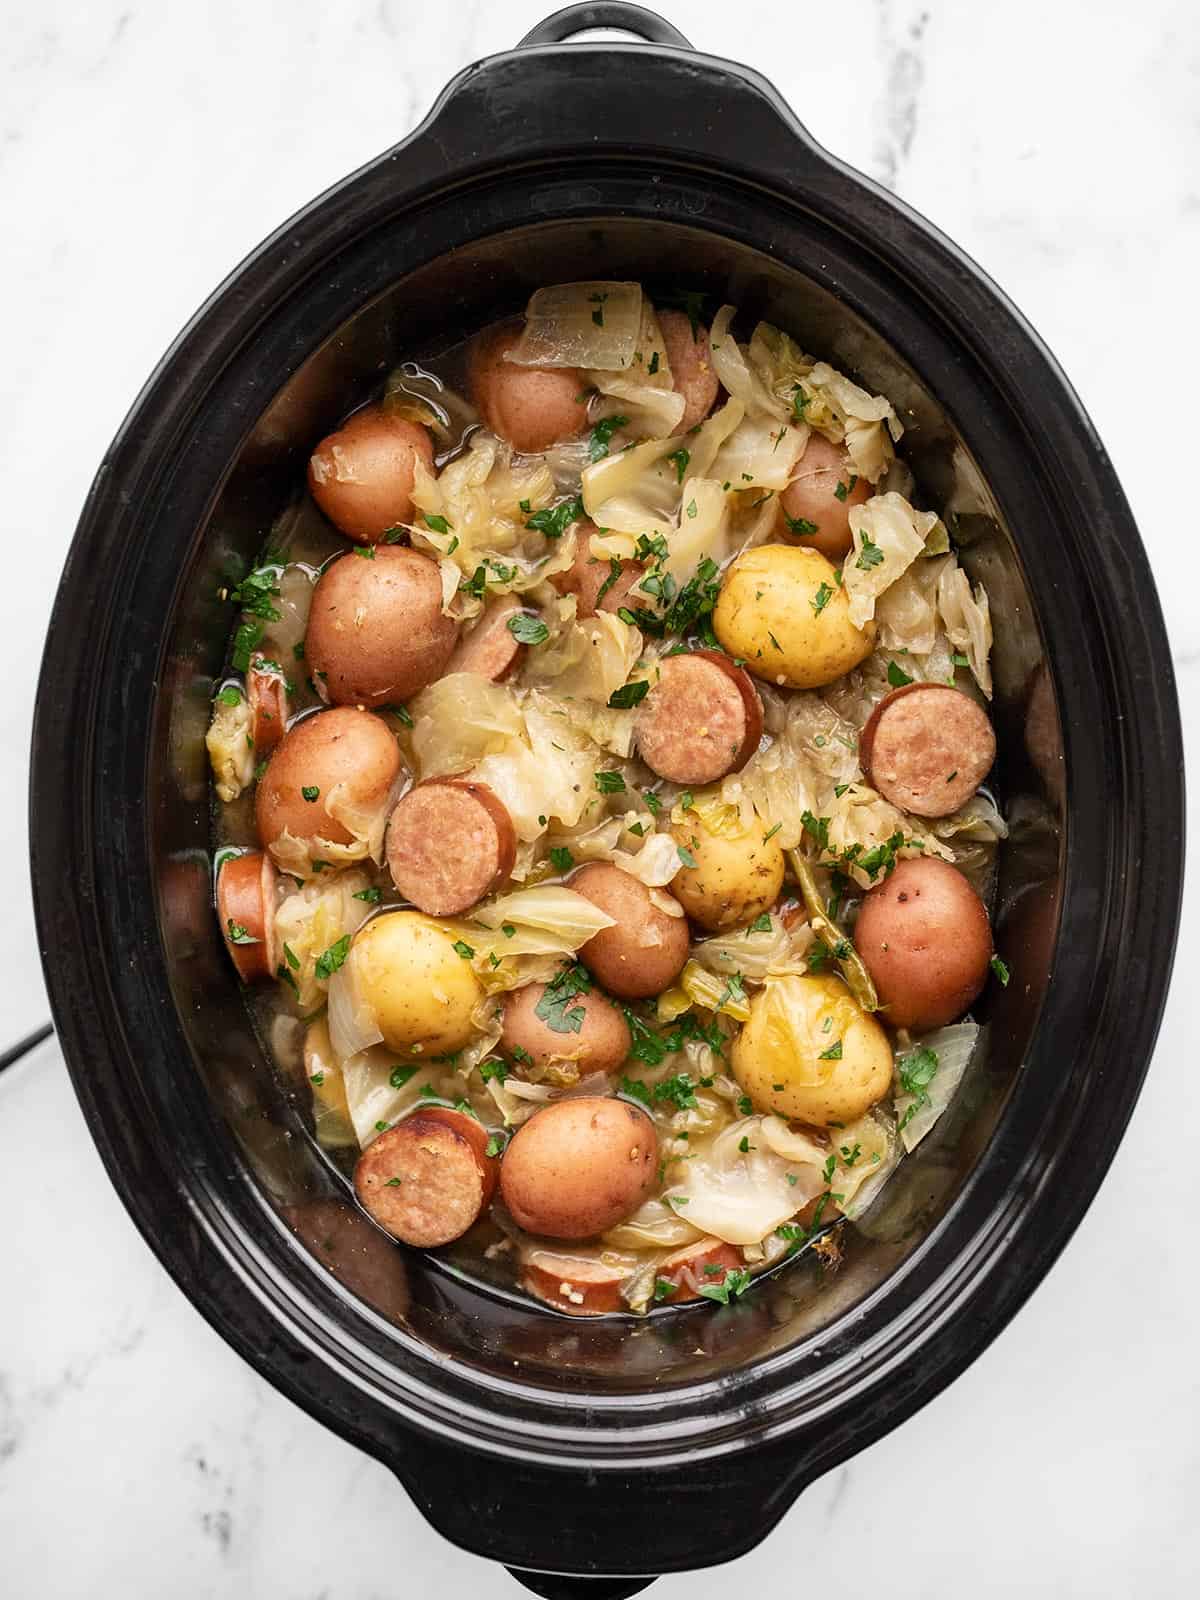 Cabbage, sausage, and potatoes in the slow cooker